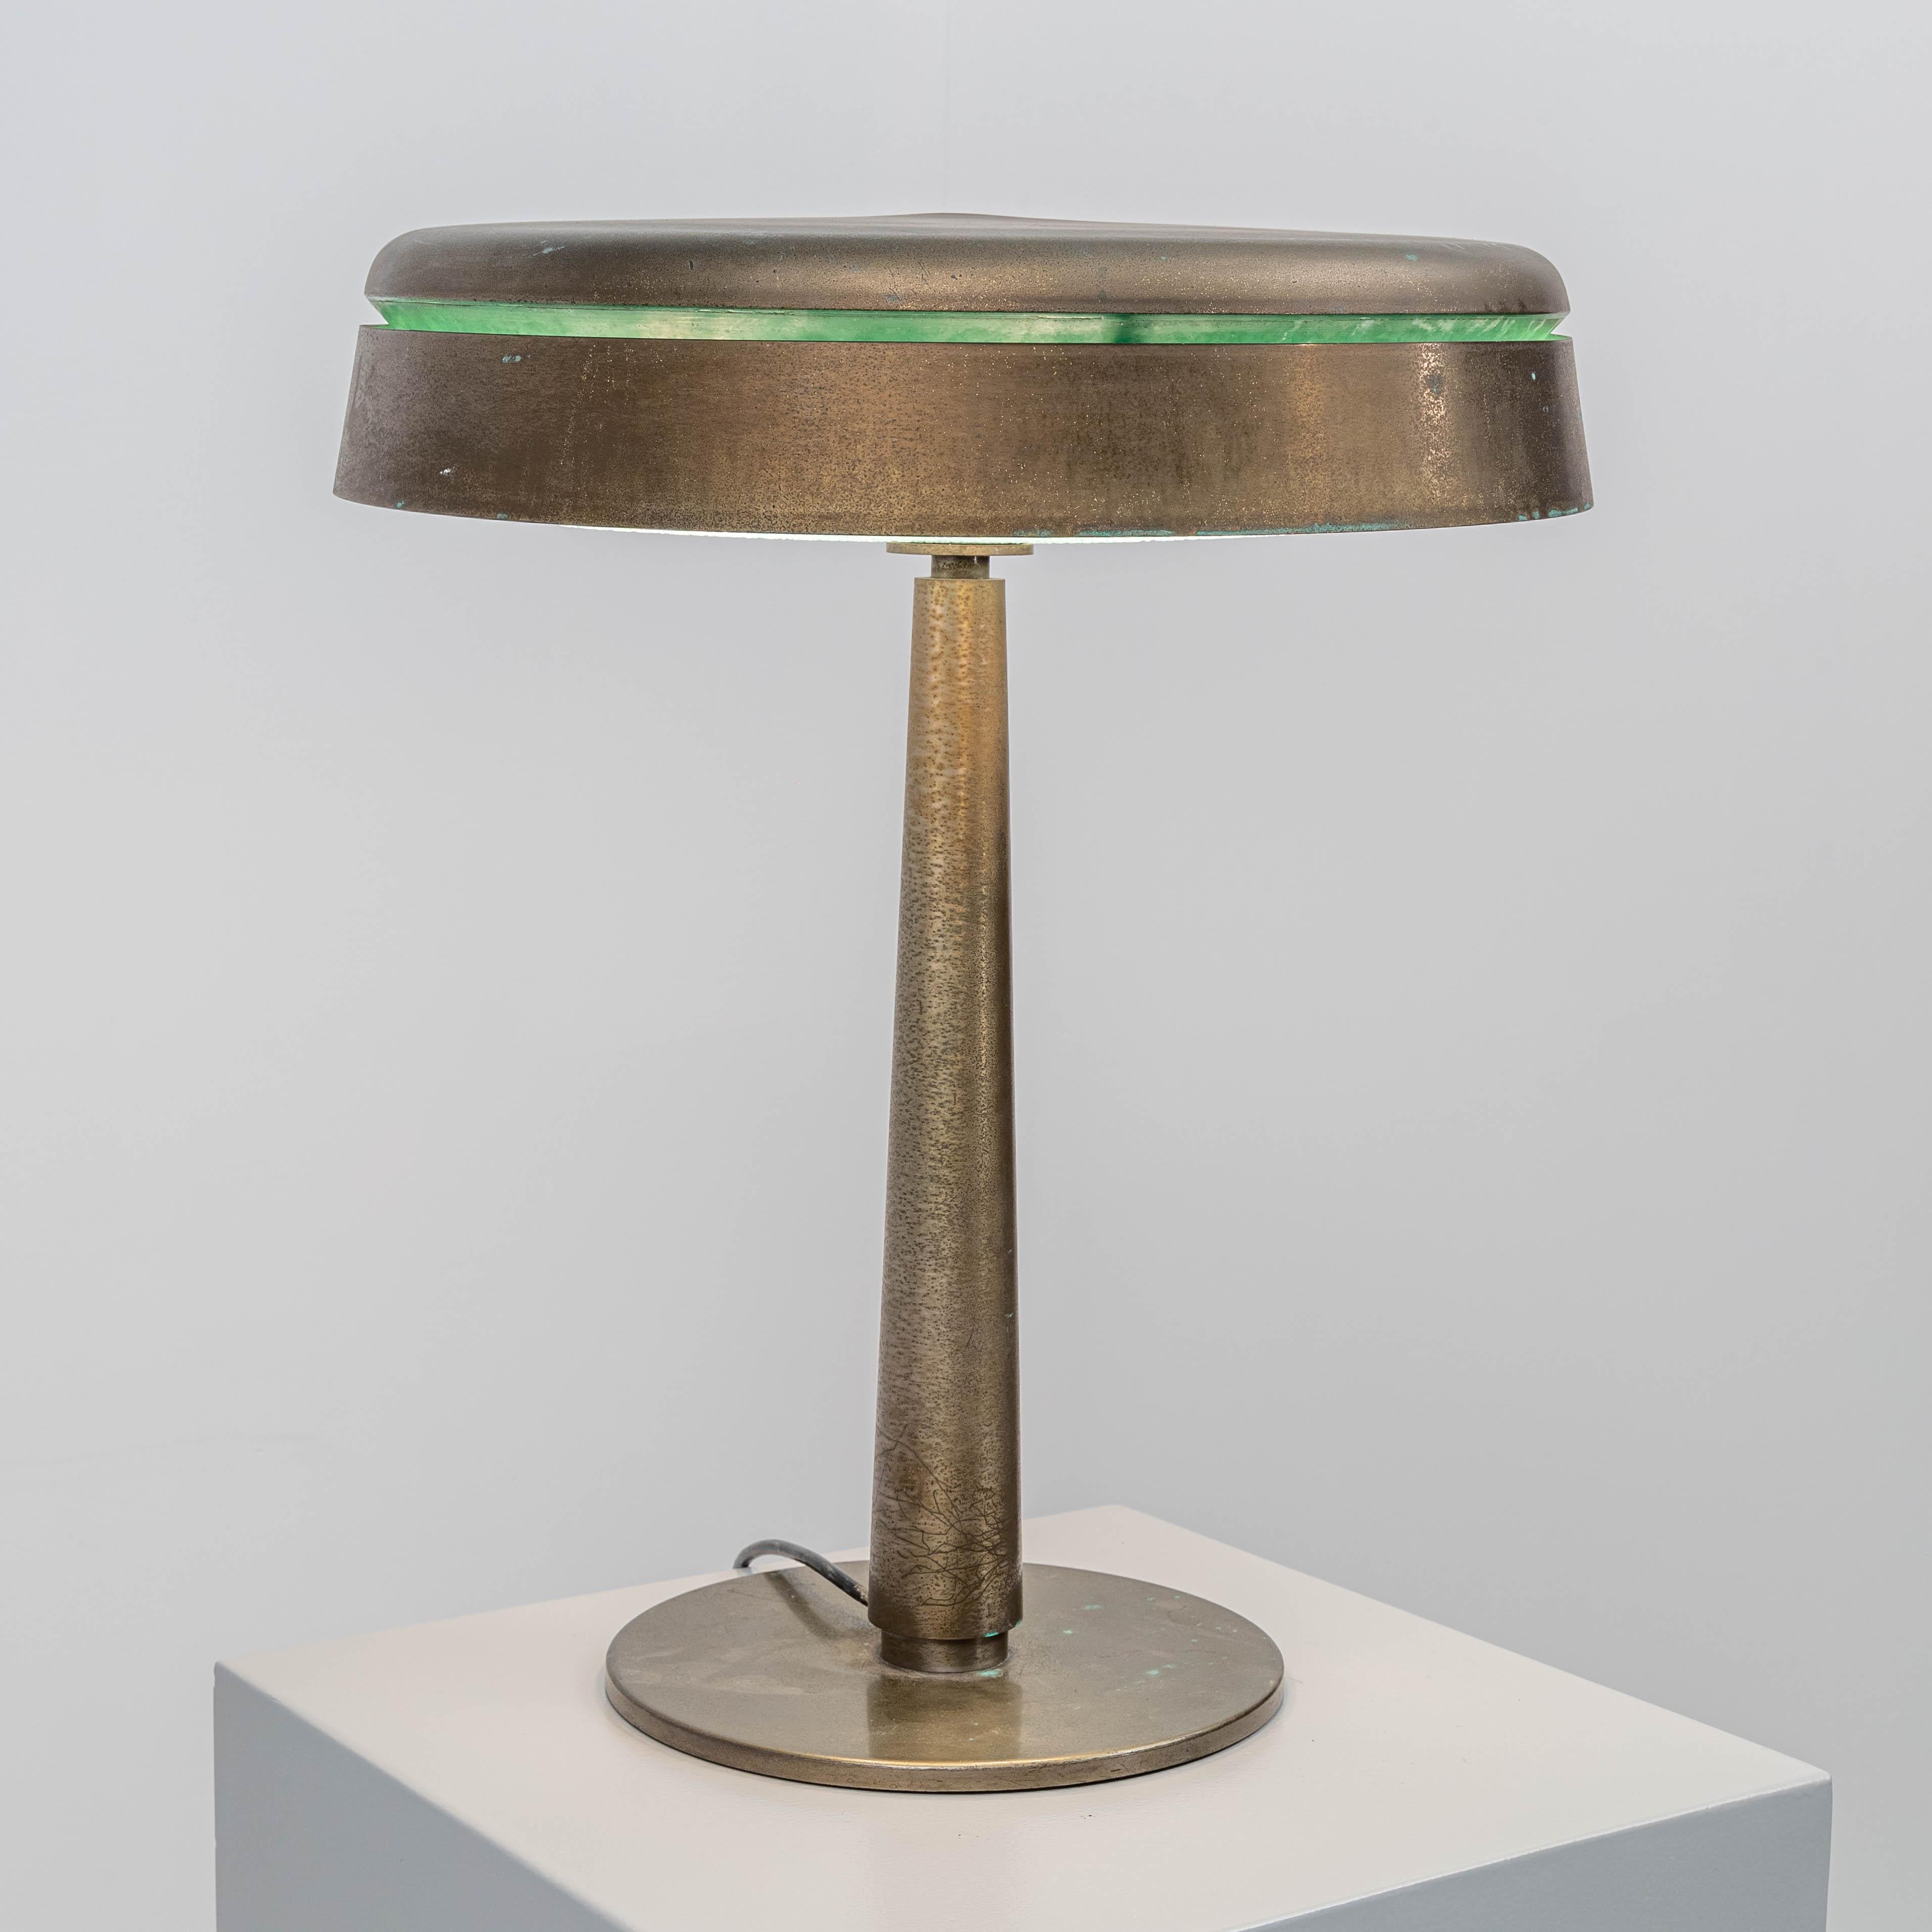 An old version of the #2278 with green interior shade. The brass has oxidised very nicely over the years. A heavy and stately table lamp with very well chosen proportions and interesting details such as the textured and curved glass that serves as a